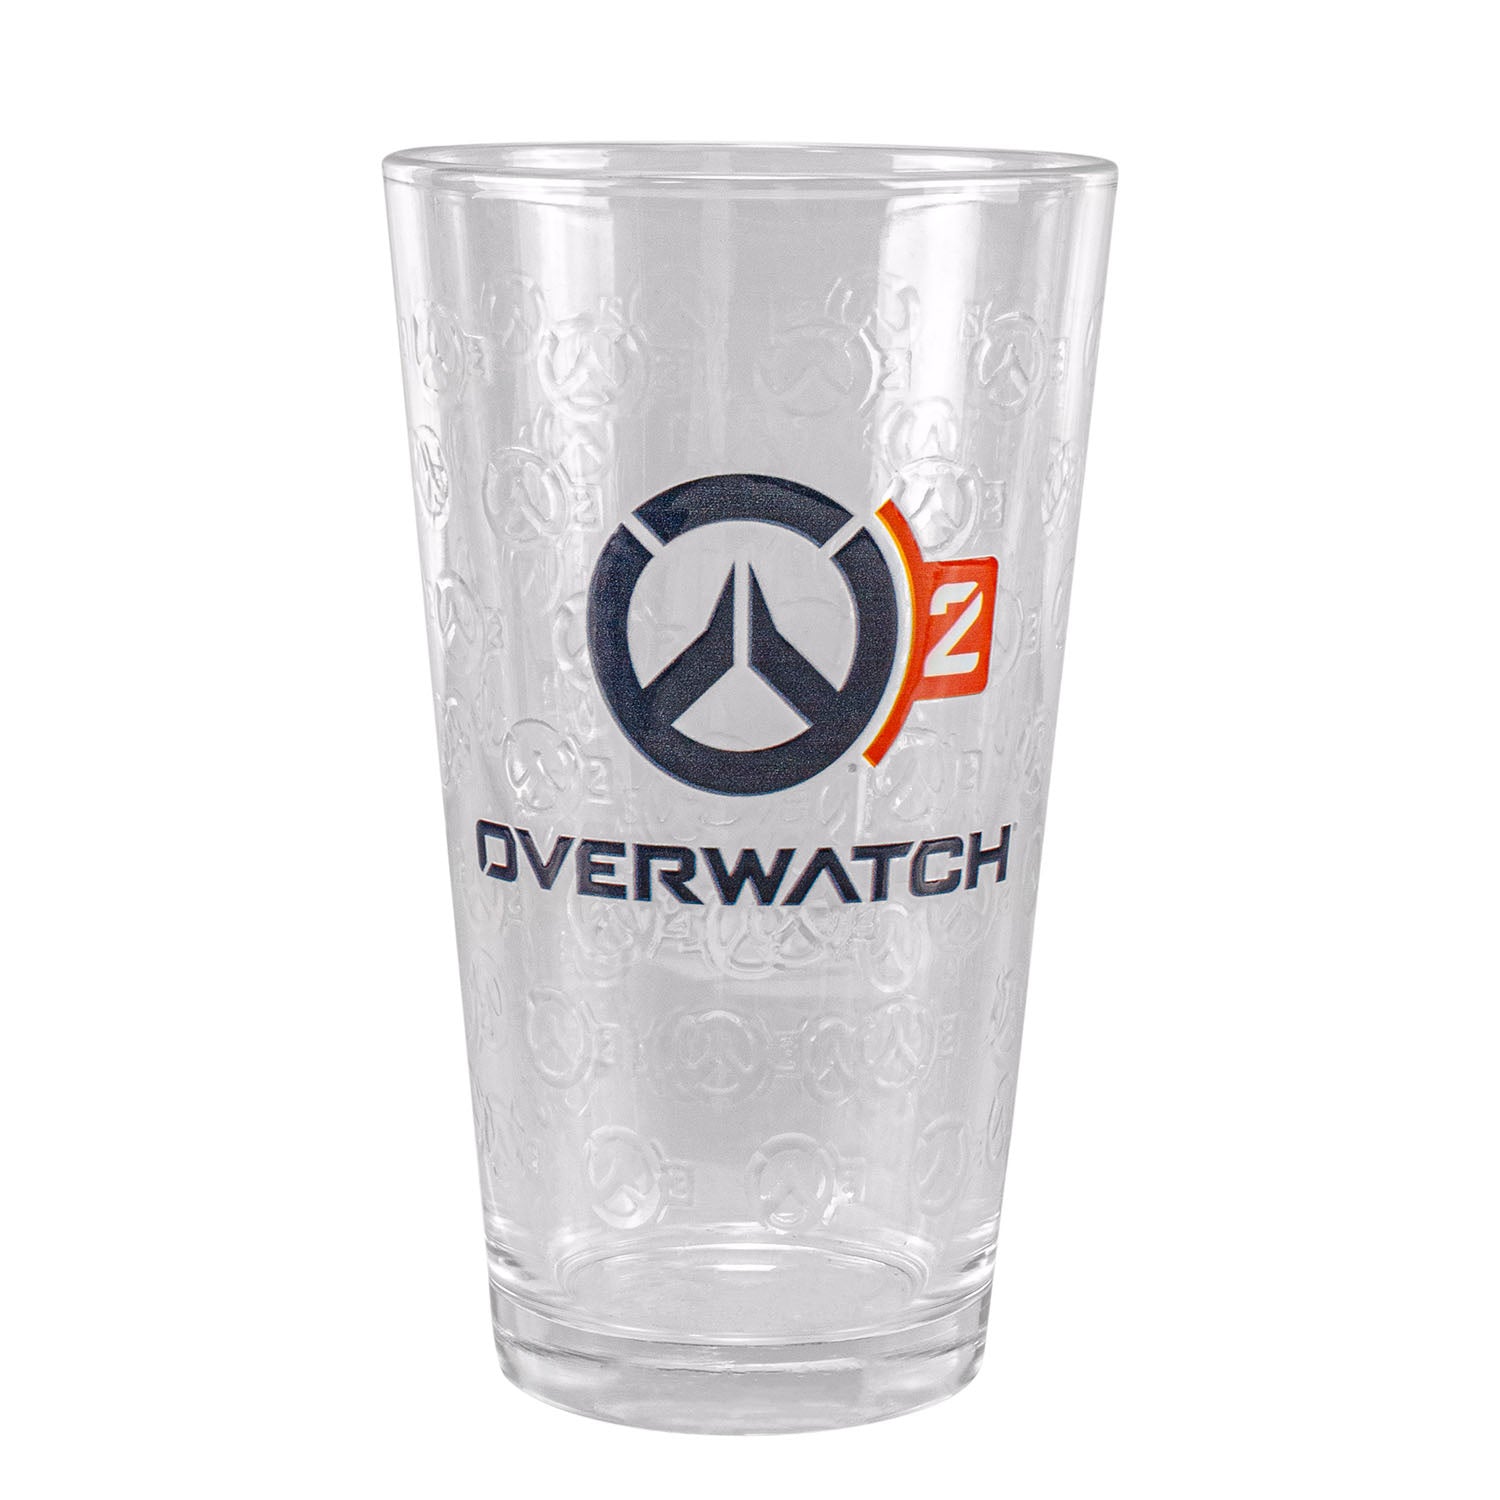 Overwatch 2 16oz Pint Glass in Blue - Front View